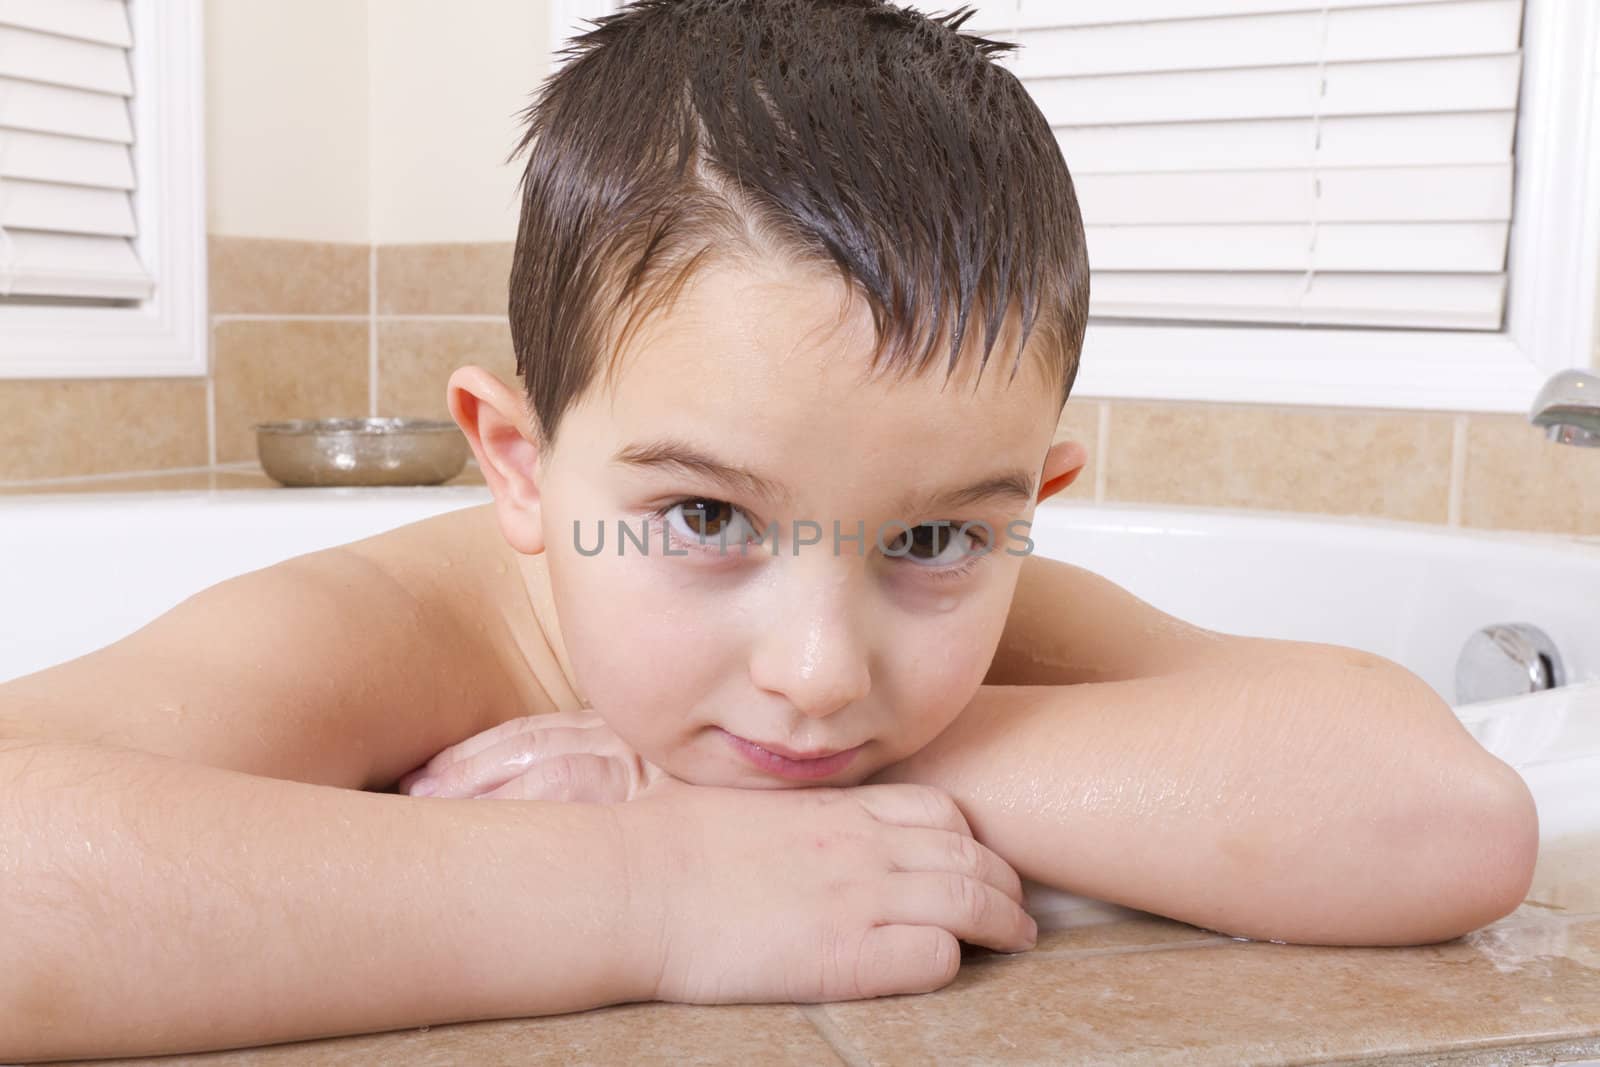 Seven years old kid looking at you ruminatively from a bath tub.